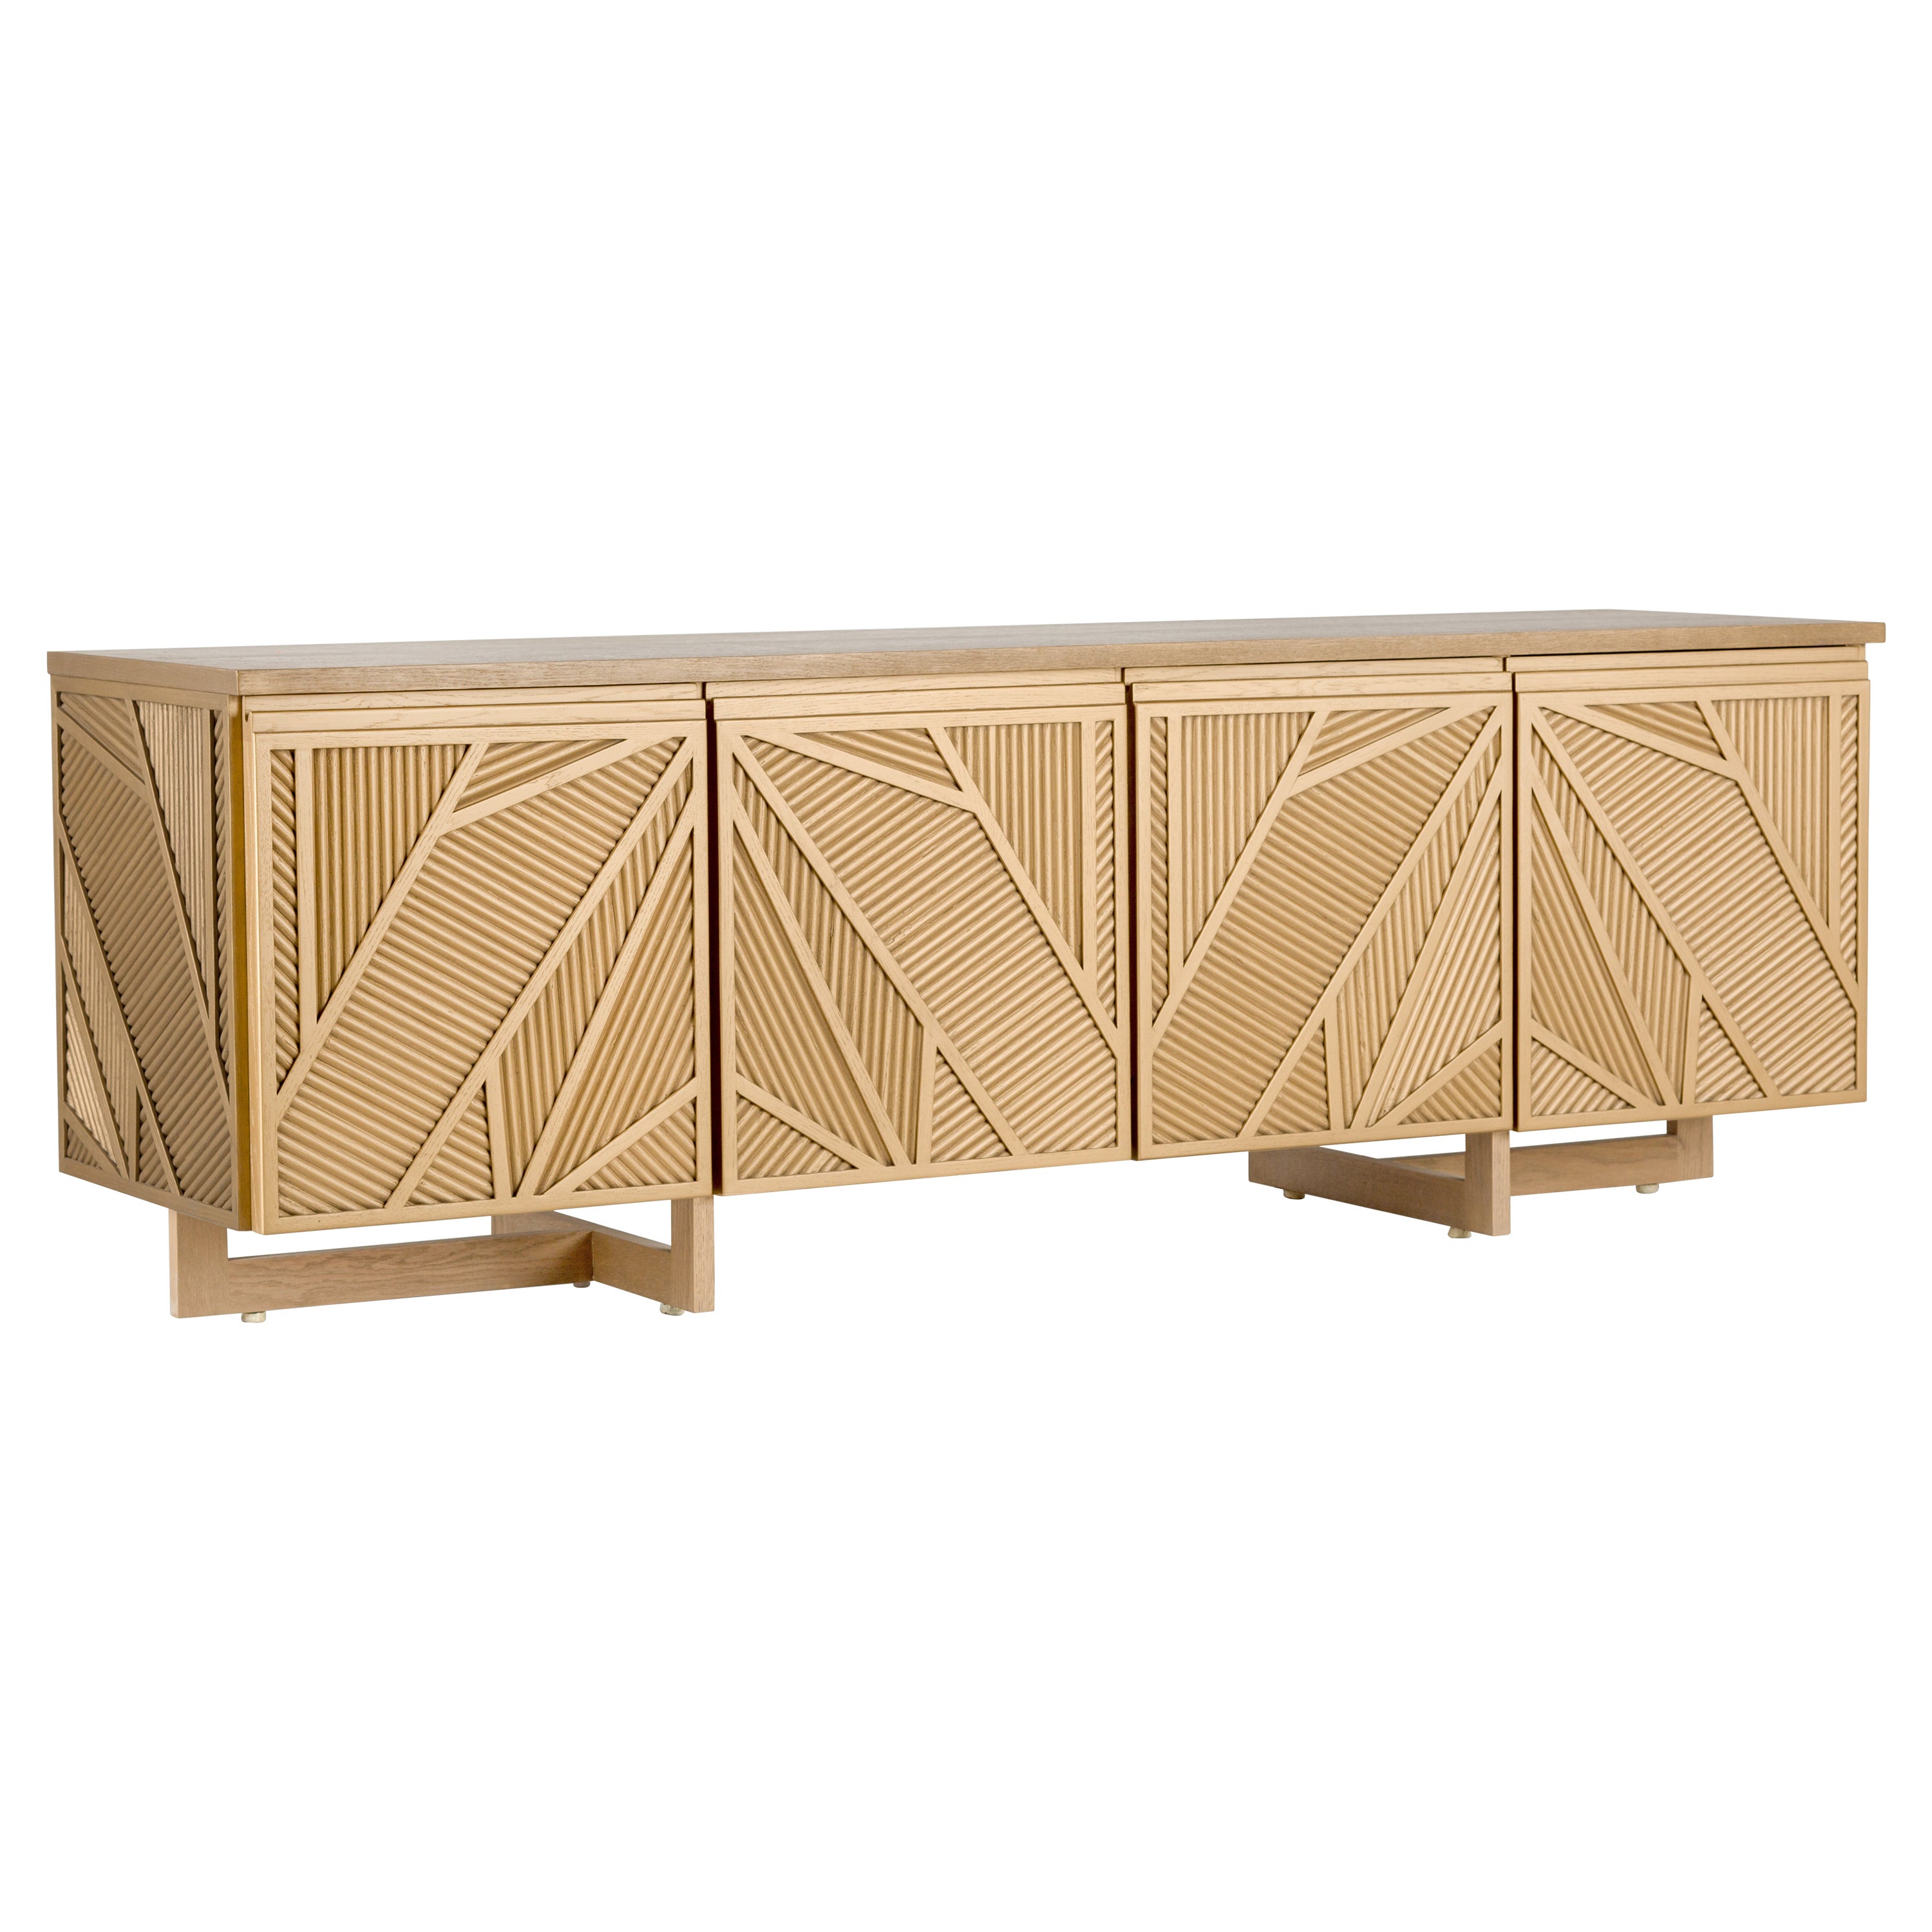 Geometric Oak Sticks TV Unit Inspired from Ancient Egypt Use of Palm Branches For Sale